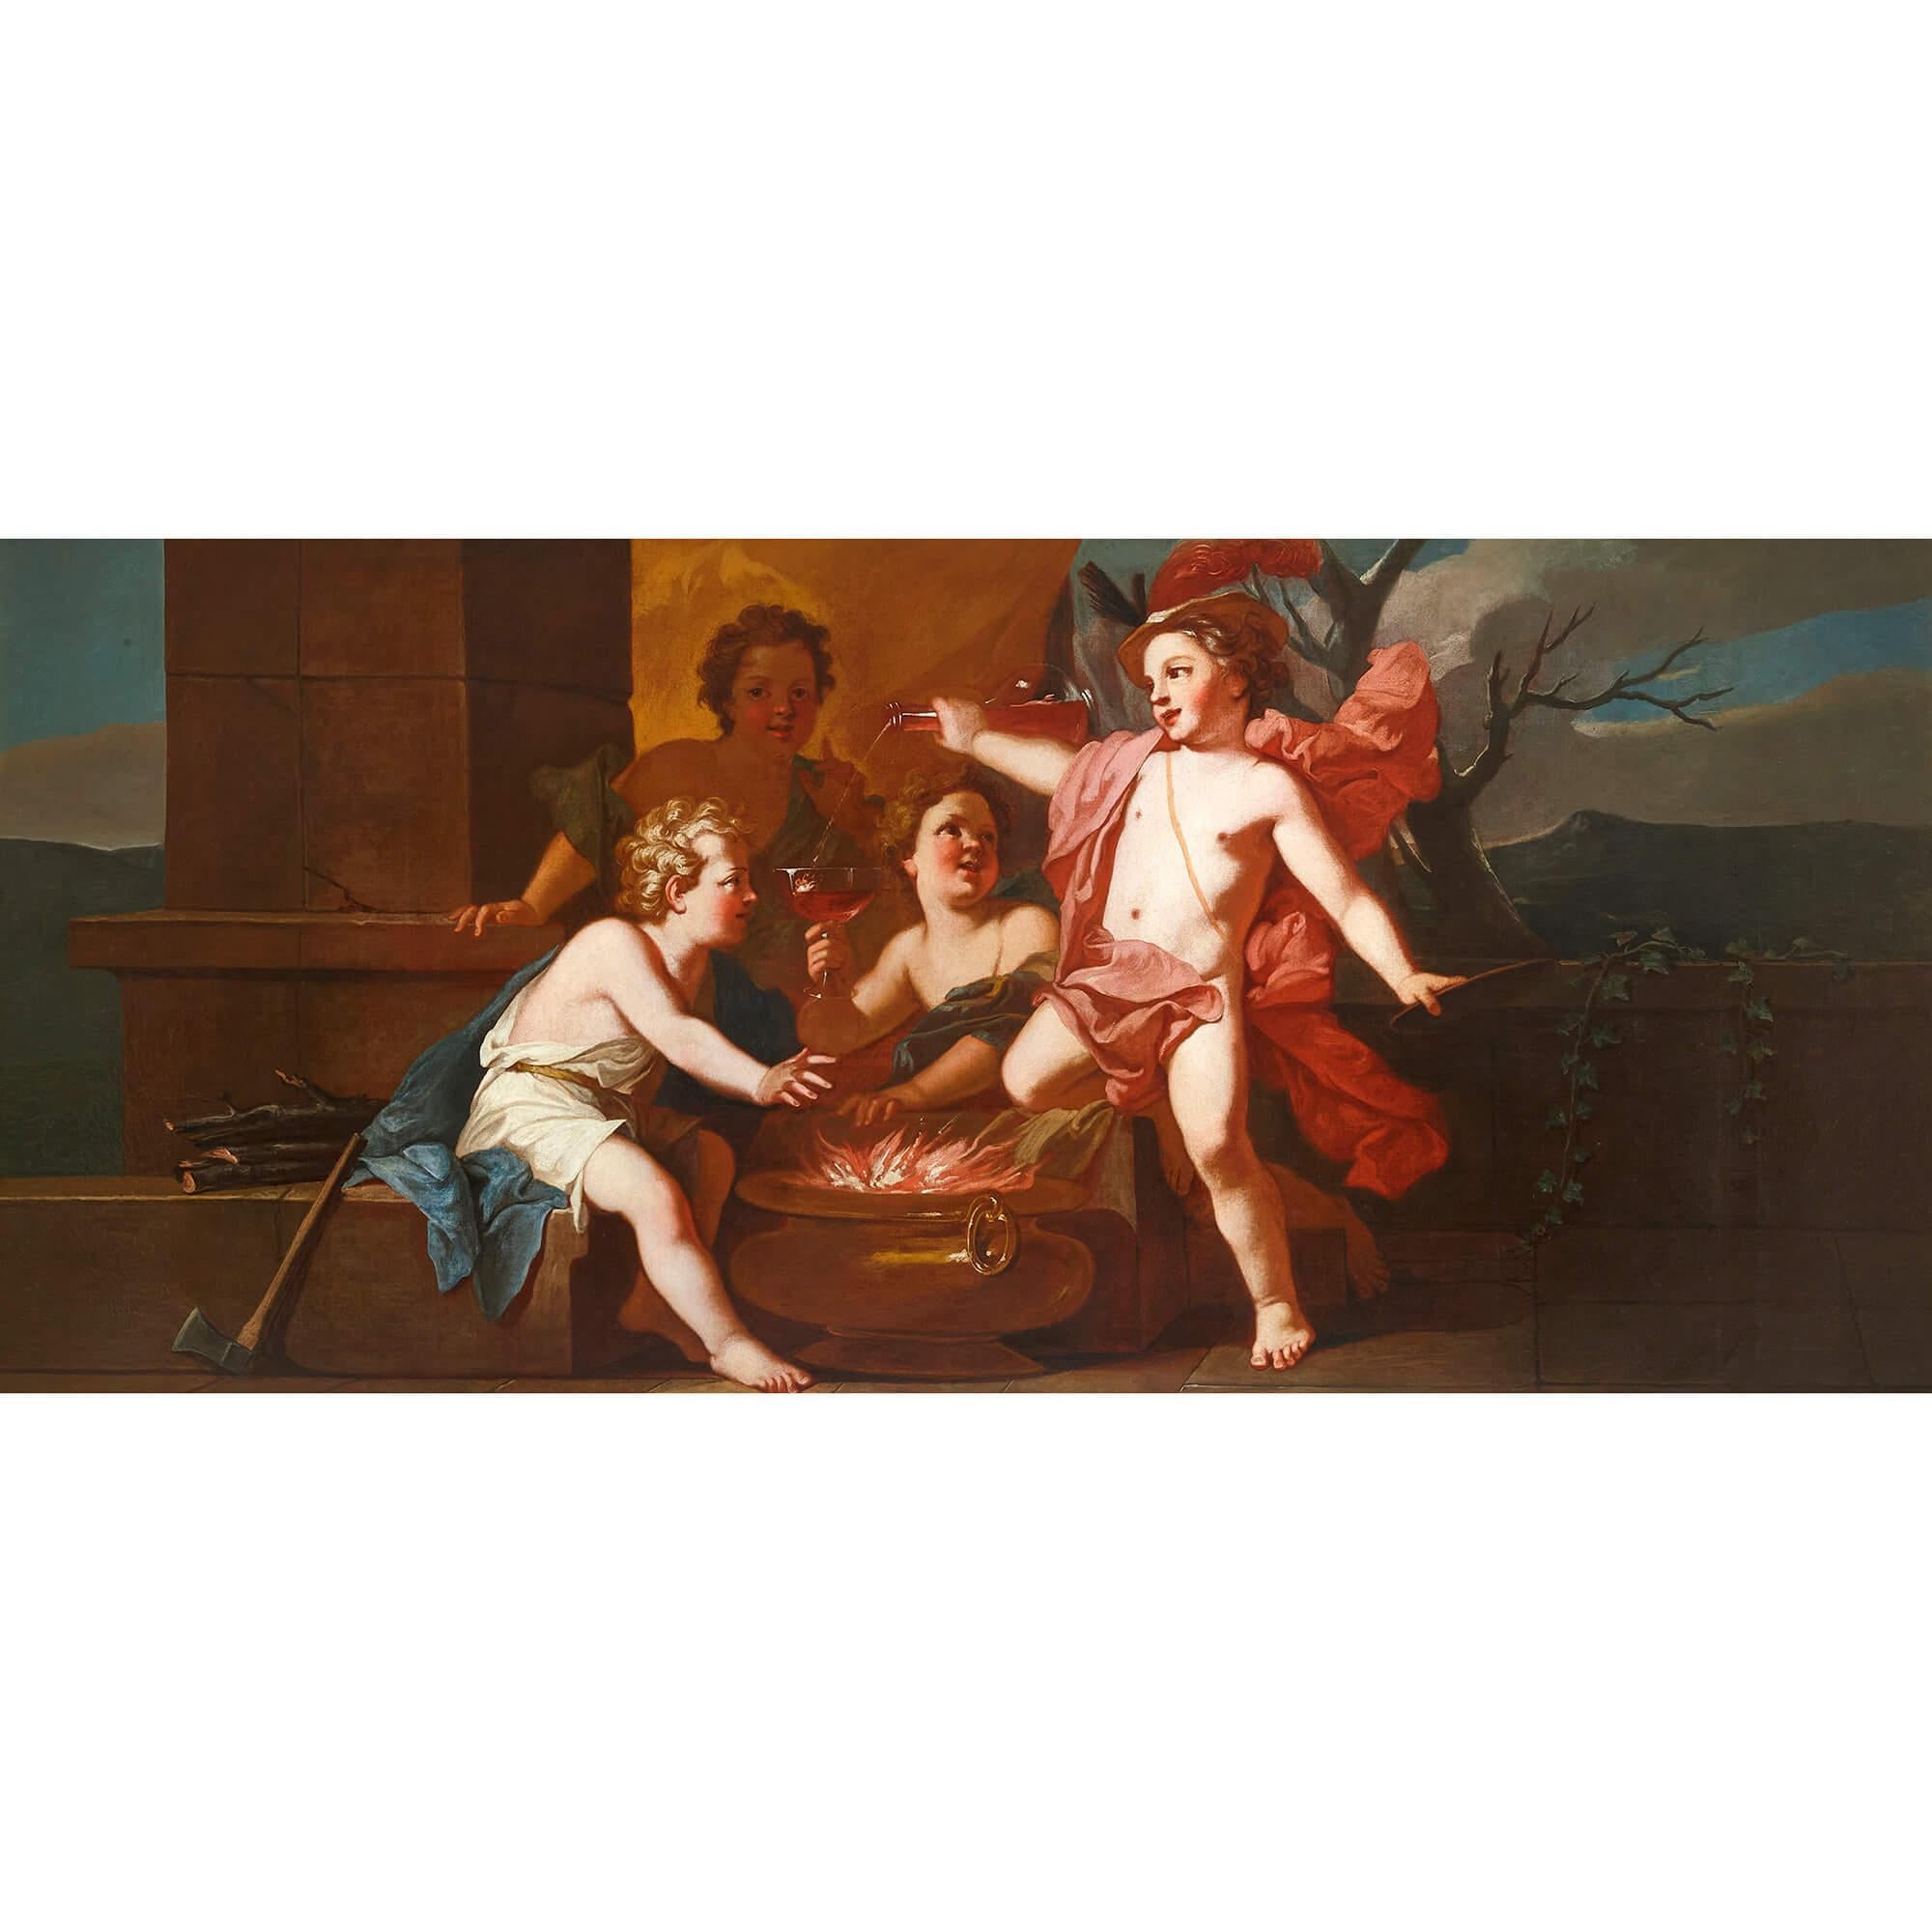 Set of four large 18th century Italian Rococo paintings of the Four Seasons
Italian, 18th Century
Frames: height 98cm, width 201.5cm, depth 5cm
Canvases: height 85cm, width 188cm, depth 2.5

By an Italian artist active in Rome sometime during the